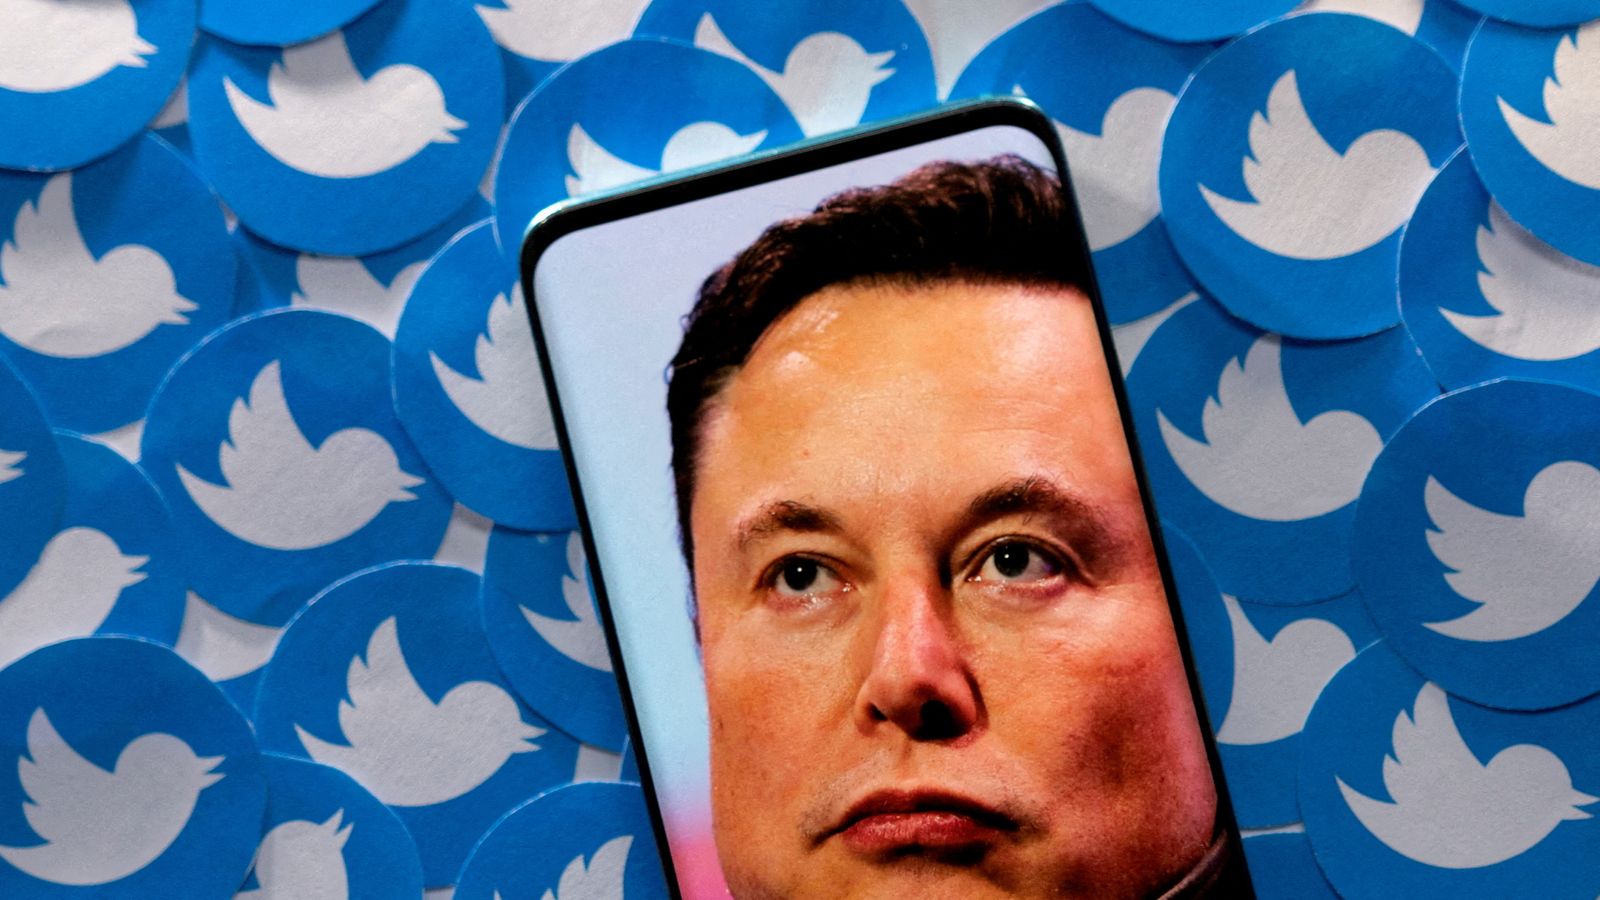 Elon Musk being investigated by federal authorities, Twitter reveals in court filing 